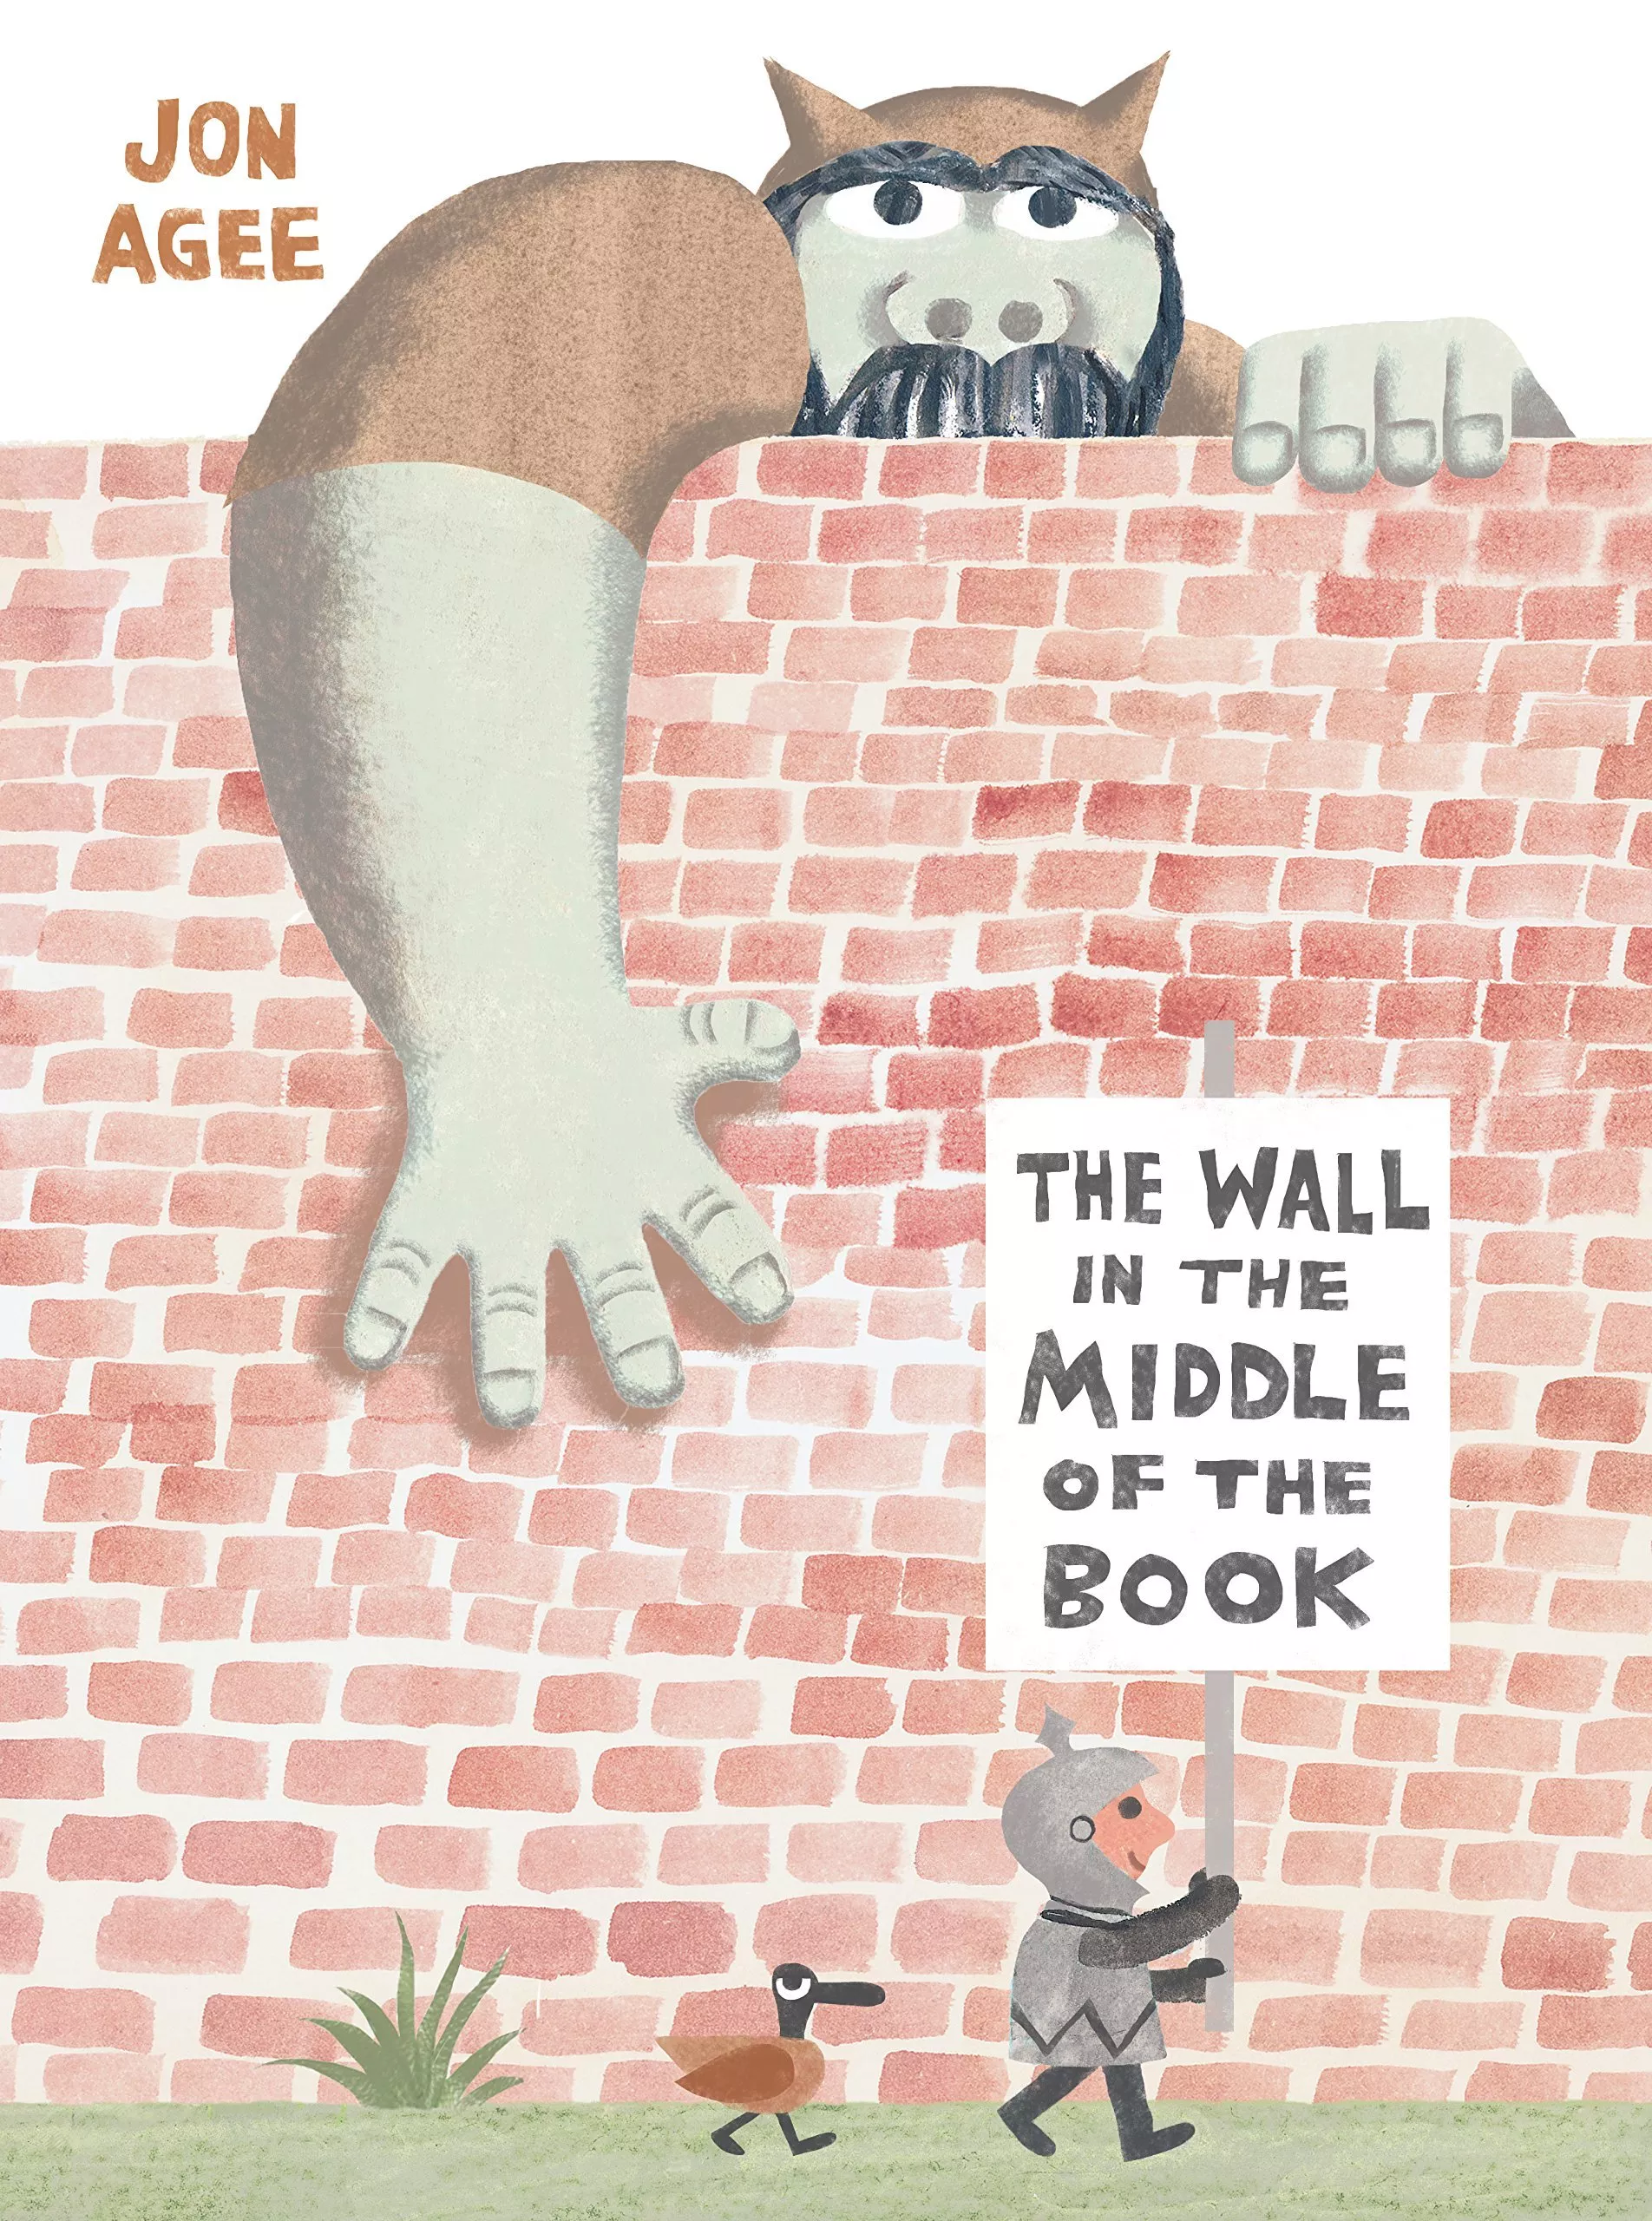 A boy dressed as a knight parades in front of a large brick wall with the title of the book on his sign. Reaching one arm over the wall is a giant.